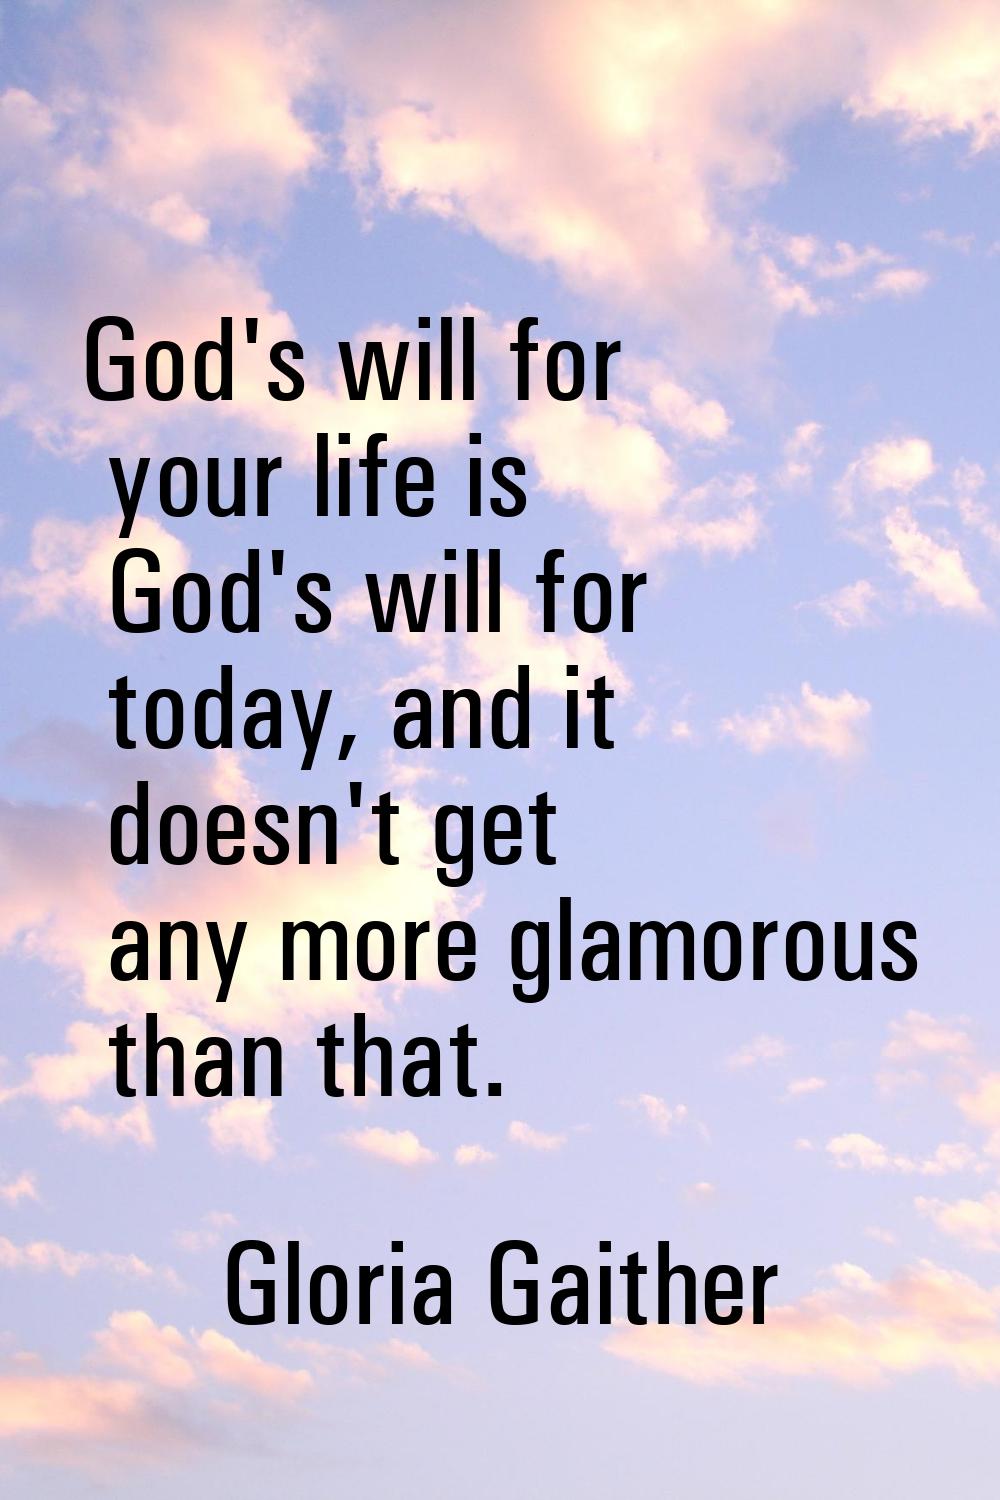 God's will for your life is God's will for today, and it doesn't get any more glamorous than that.